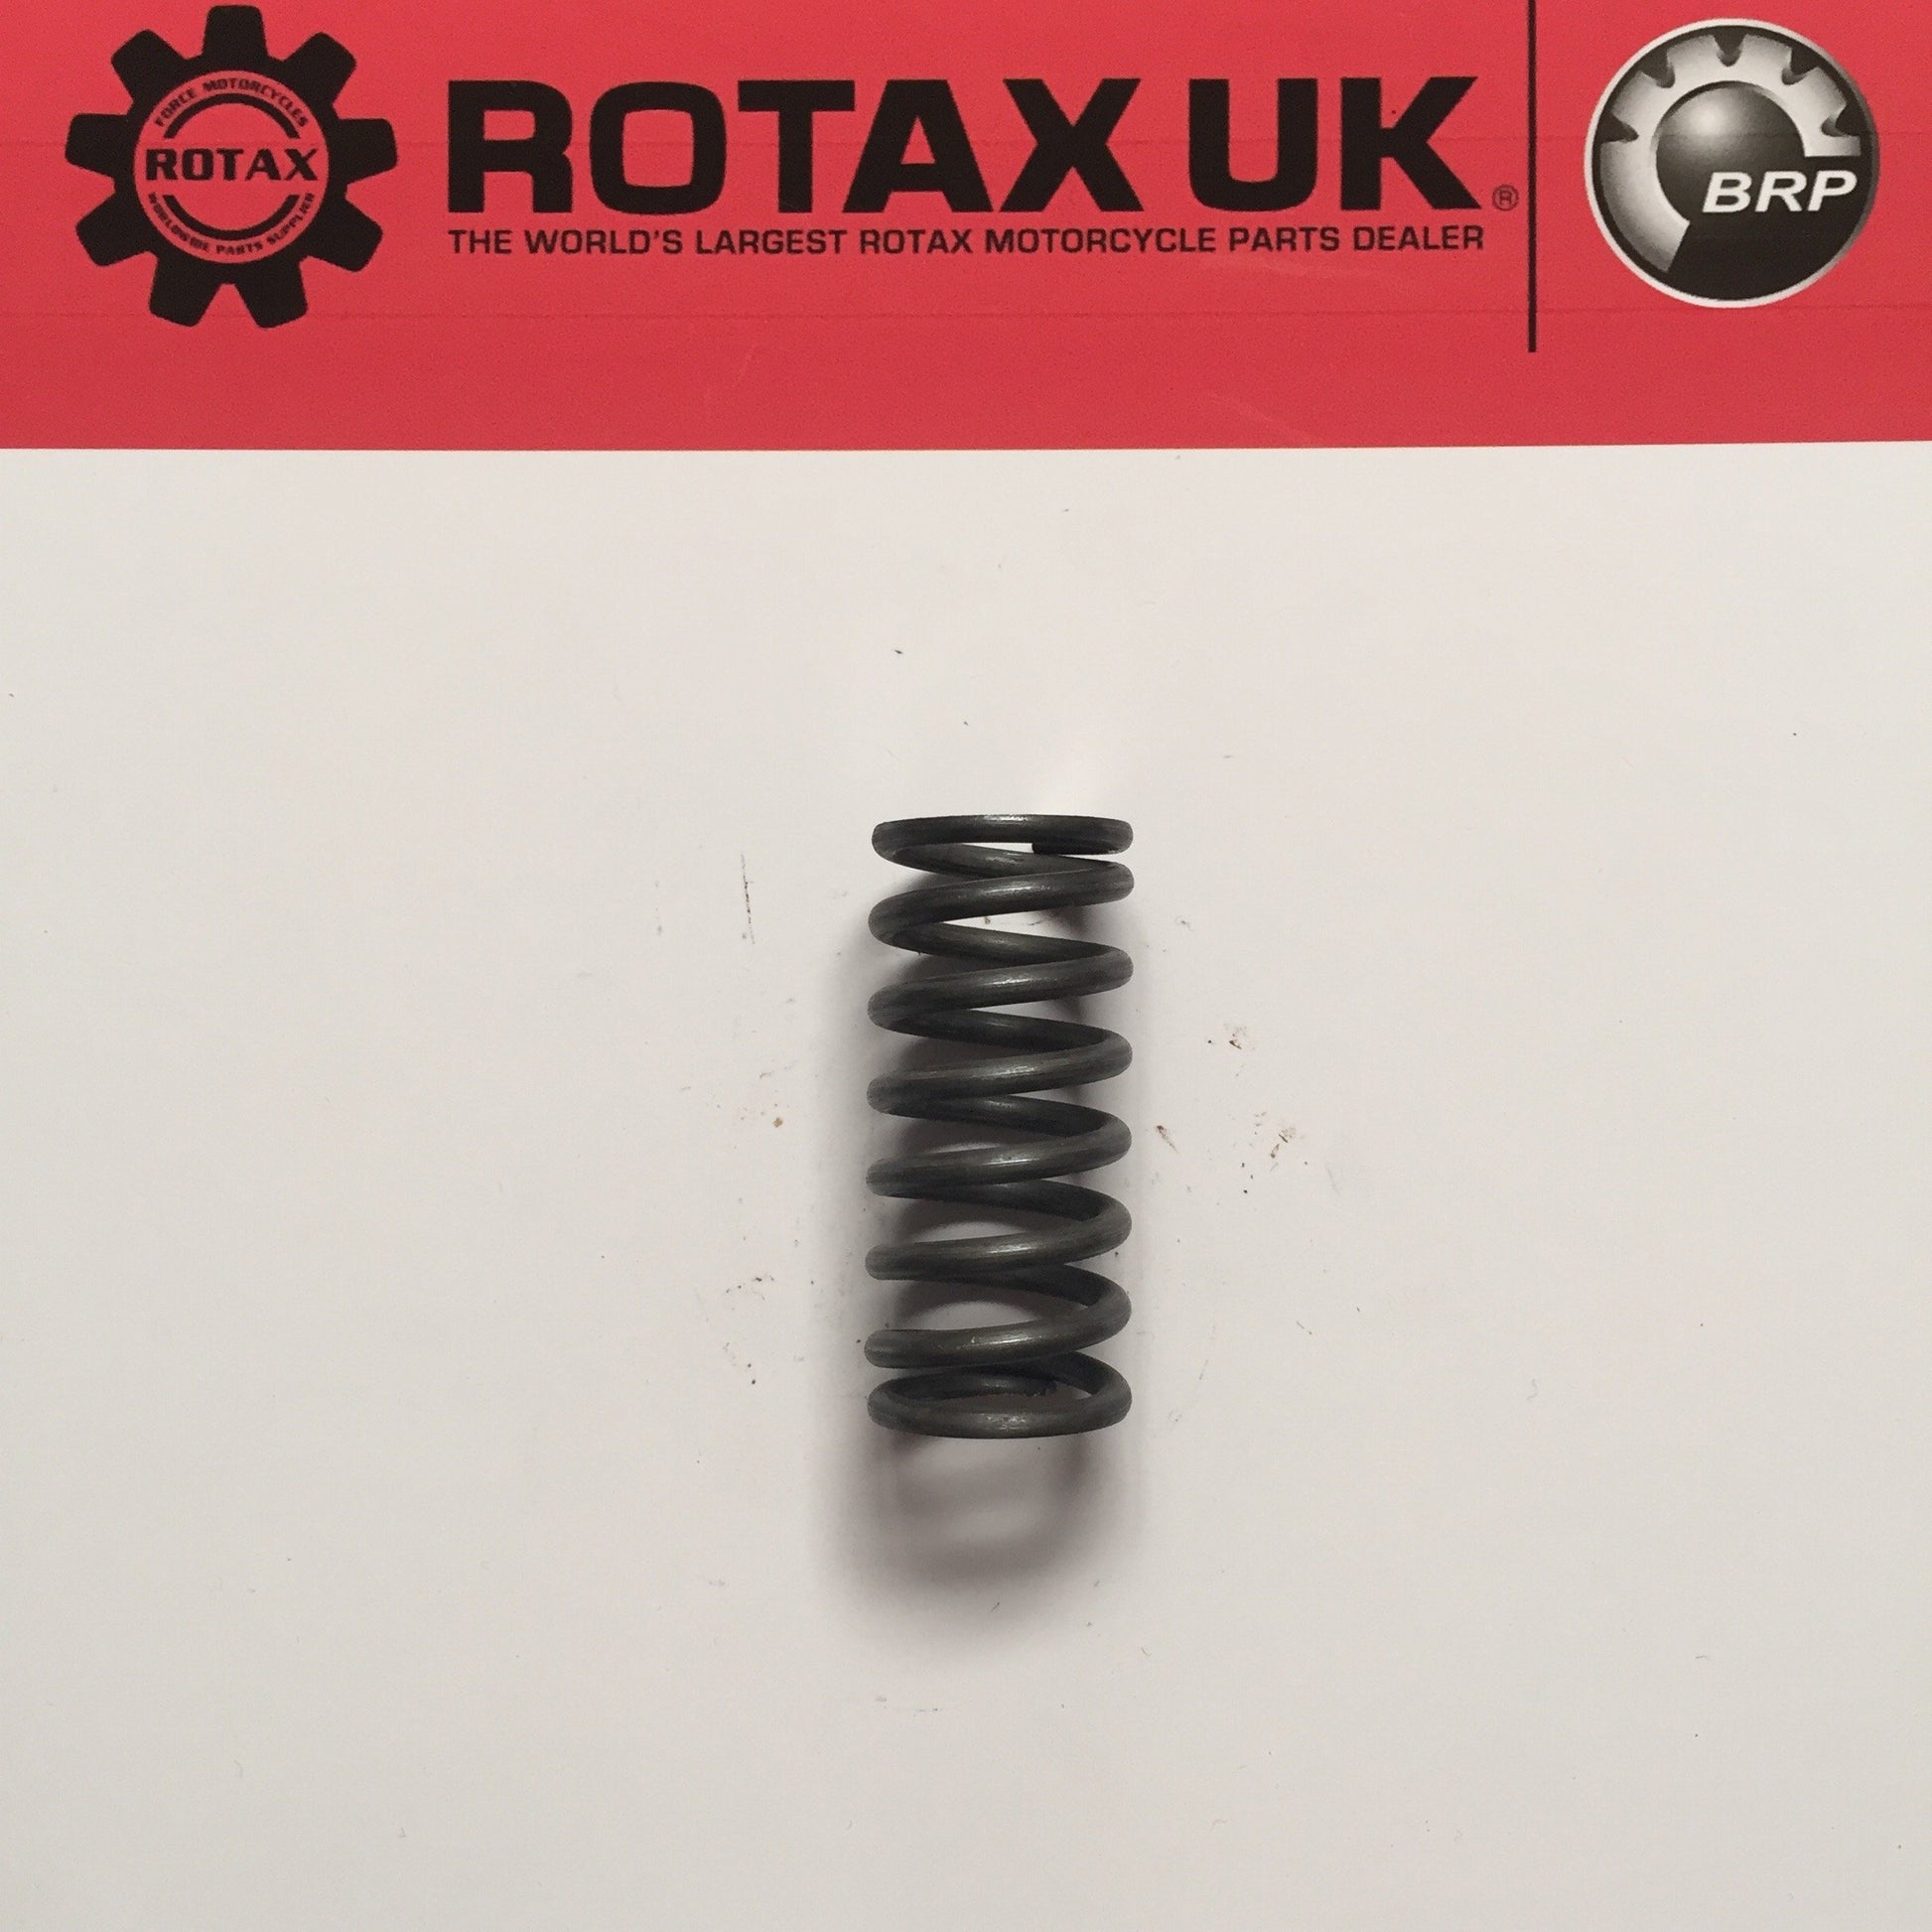 239162 - Clutch Spring 44.5mm for engine types: 655.